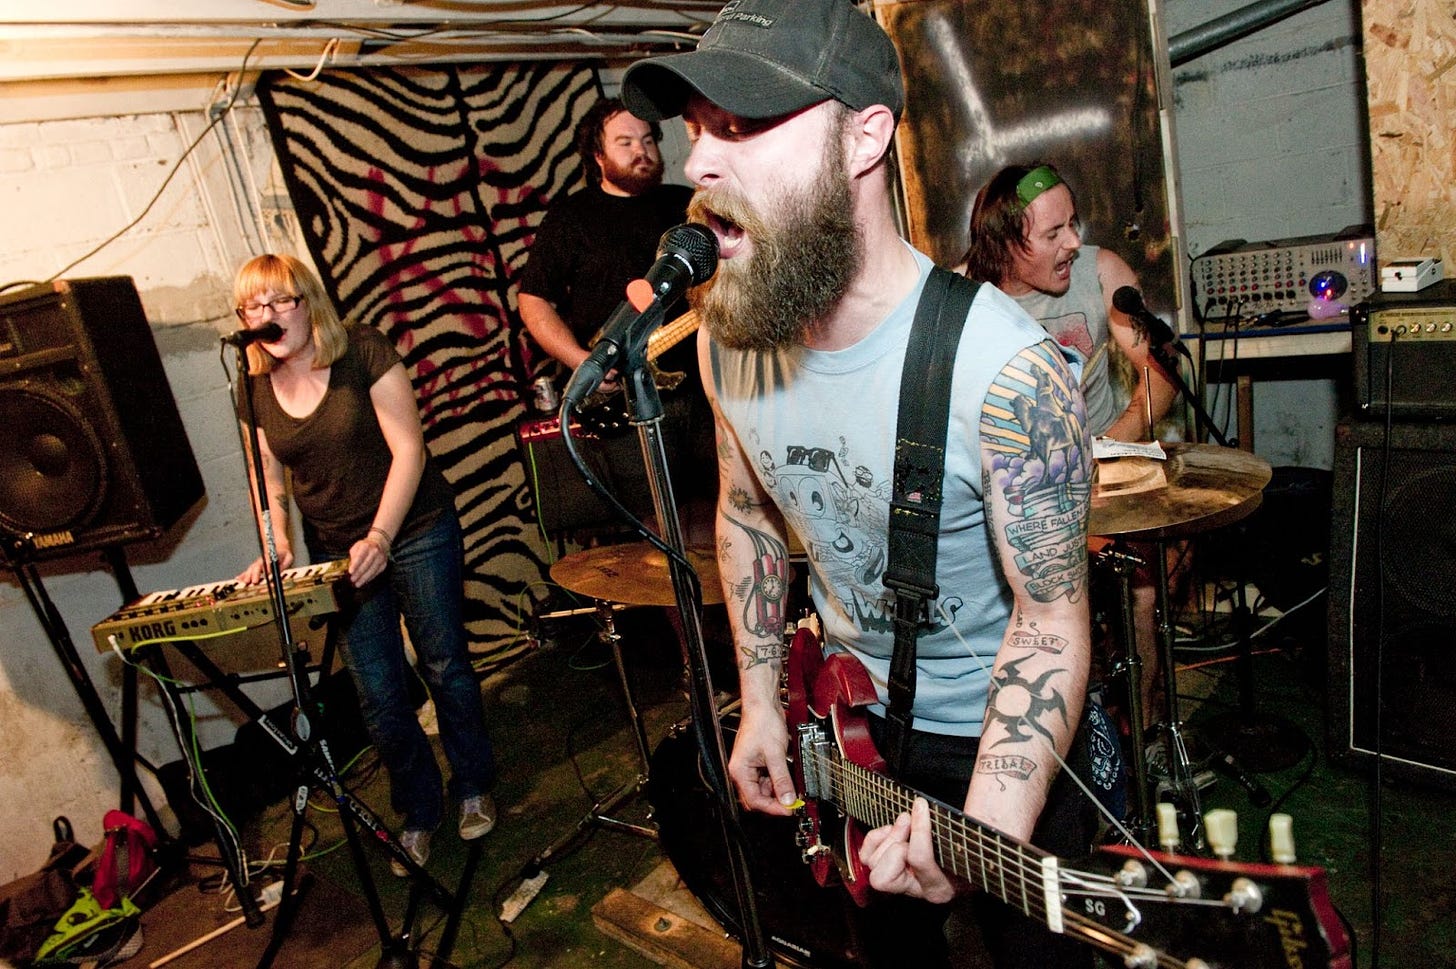 From left to right, Adrienne is standing in a brown top and jeans singing into a microphone and playing keyboard; Richard is on bass in a black tshirt and cool beard; Louis is in the back right on drums and vocals, and my husband Matt is in the front in a gray tshirt and hat, cool tattoos, and a red electric guitar while he sings into a microphone. 